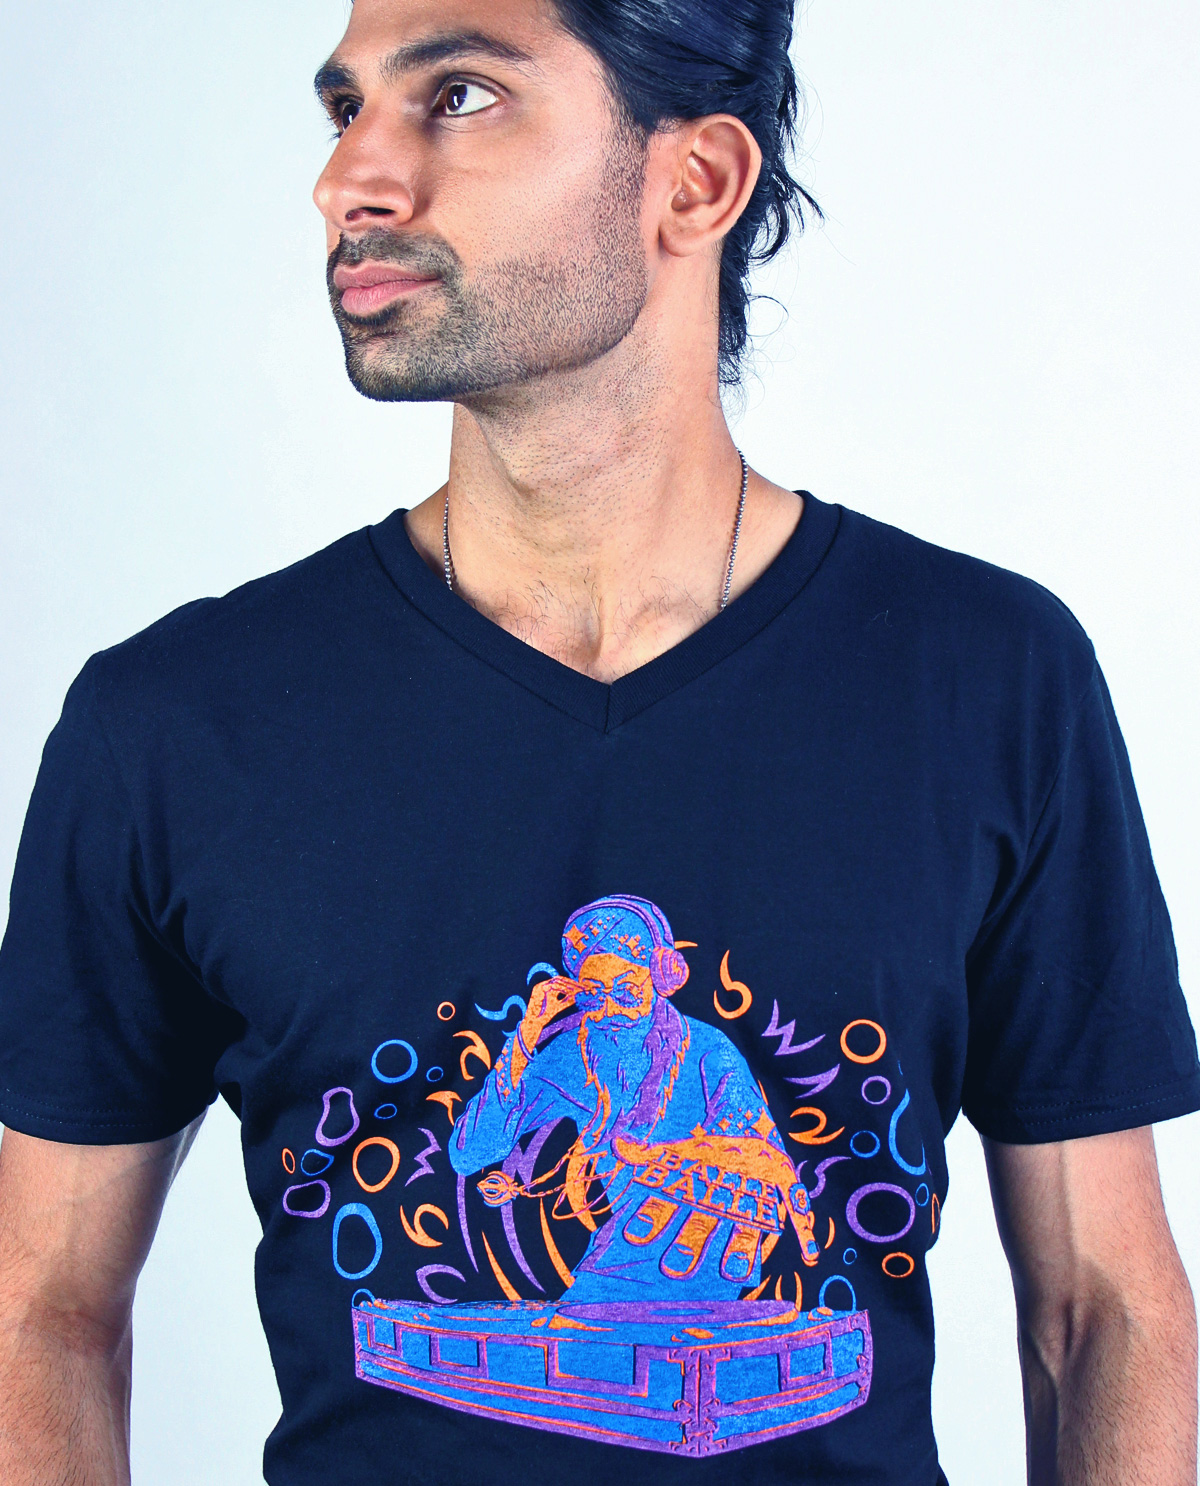 South Asian Male Model wearing full colour graphic design tshirt on black v neck fitted t-shirt by Brown Man Clothing Co.